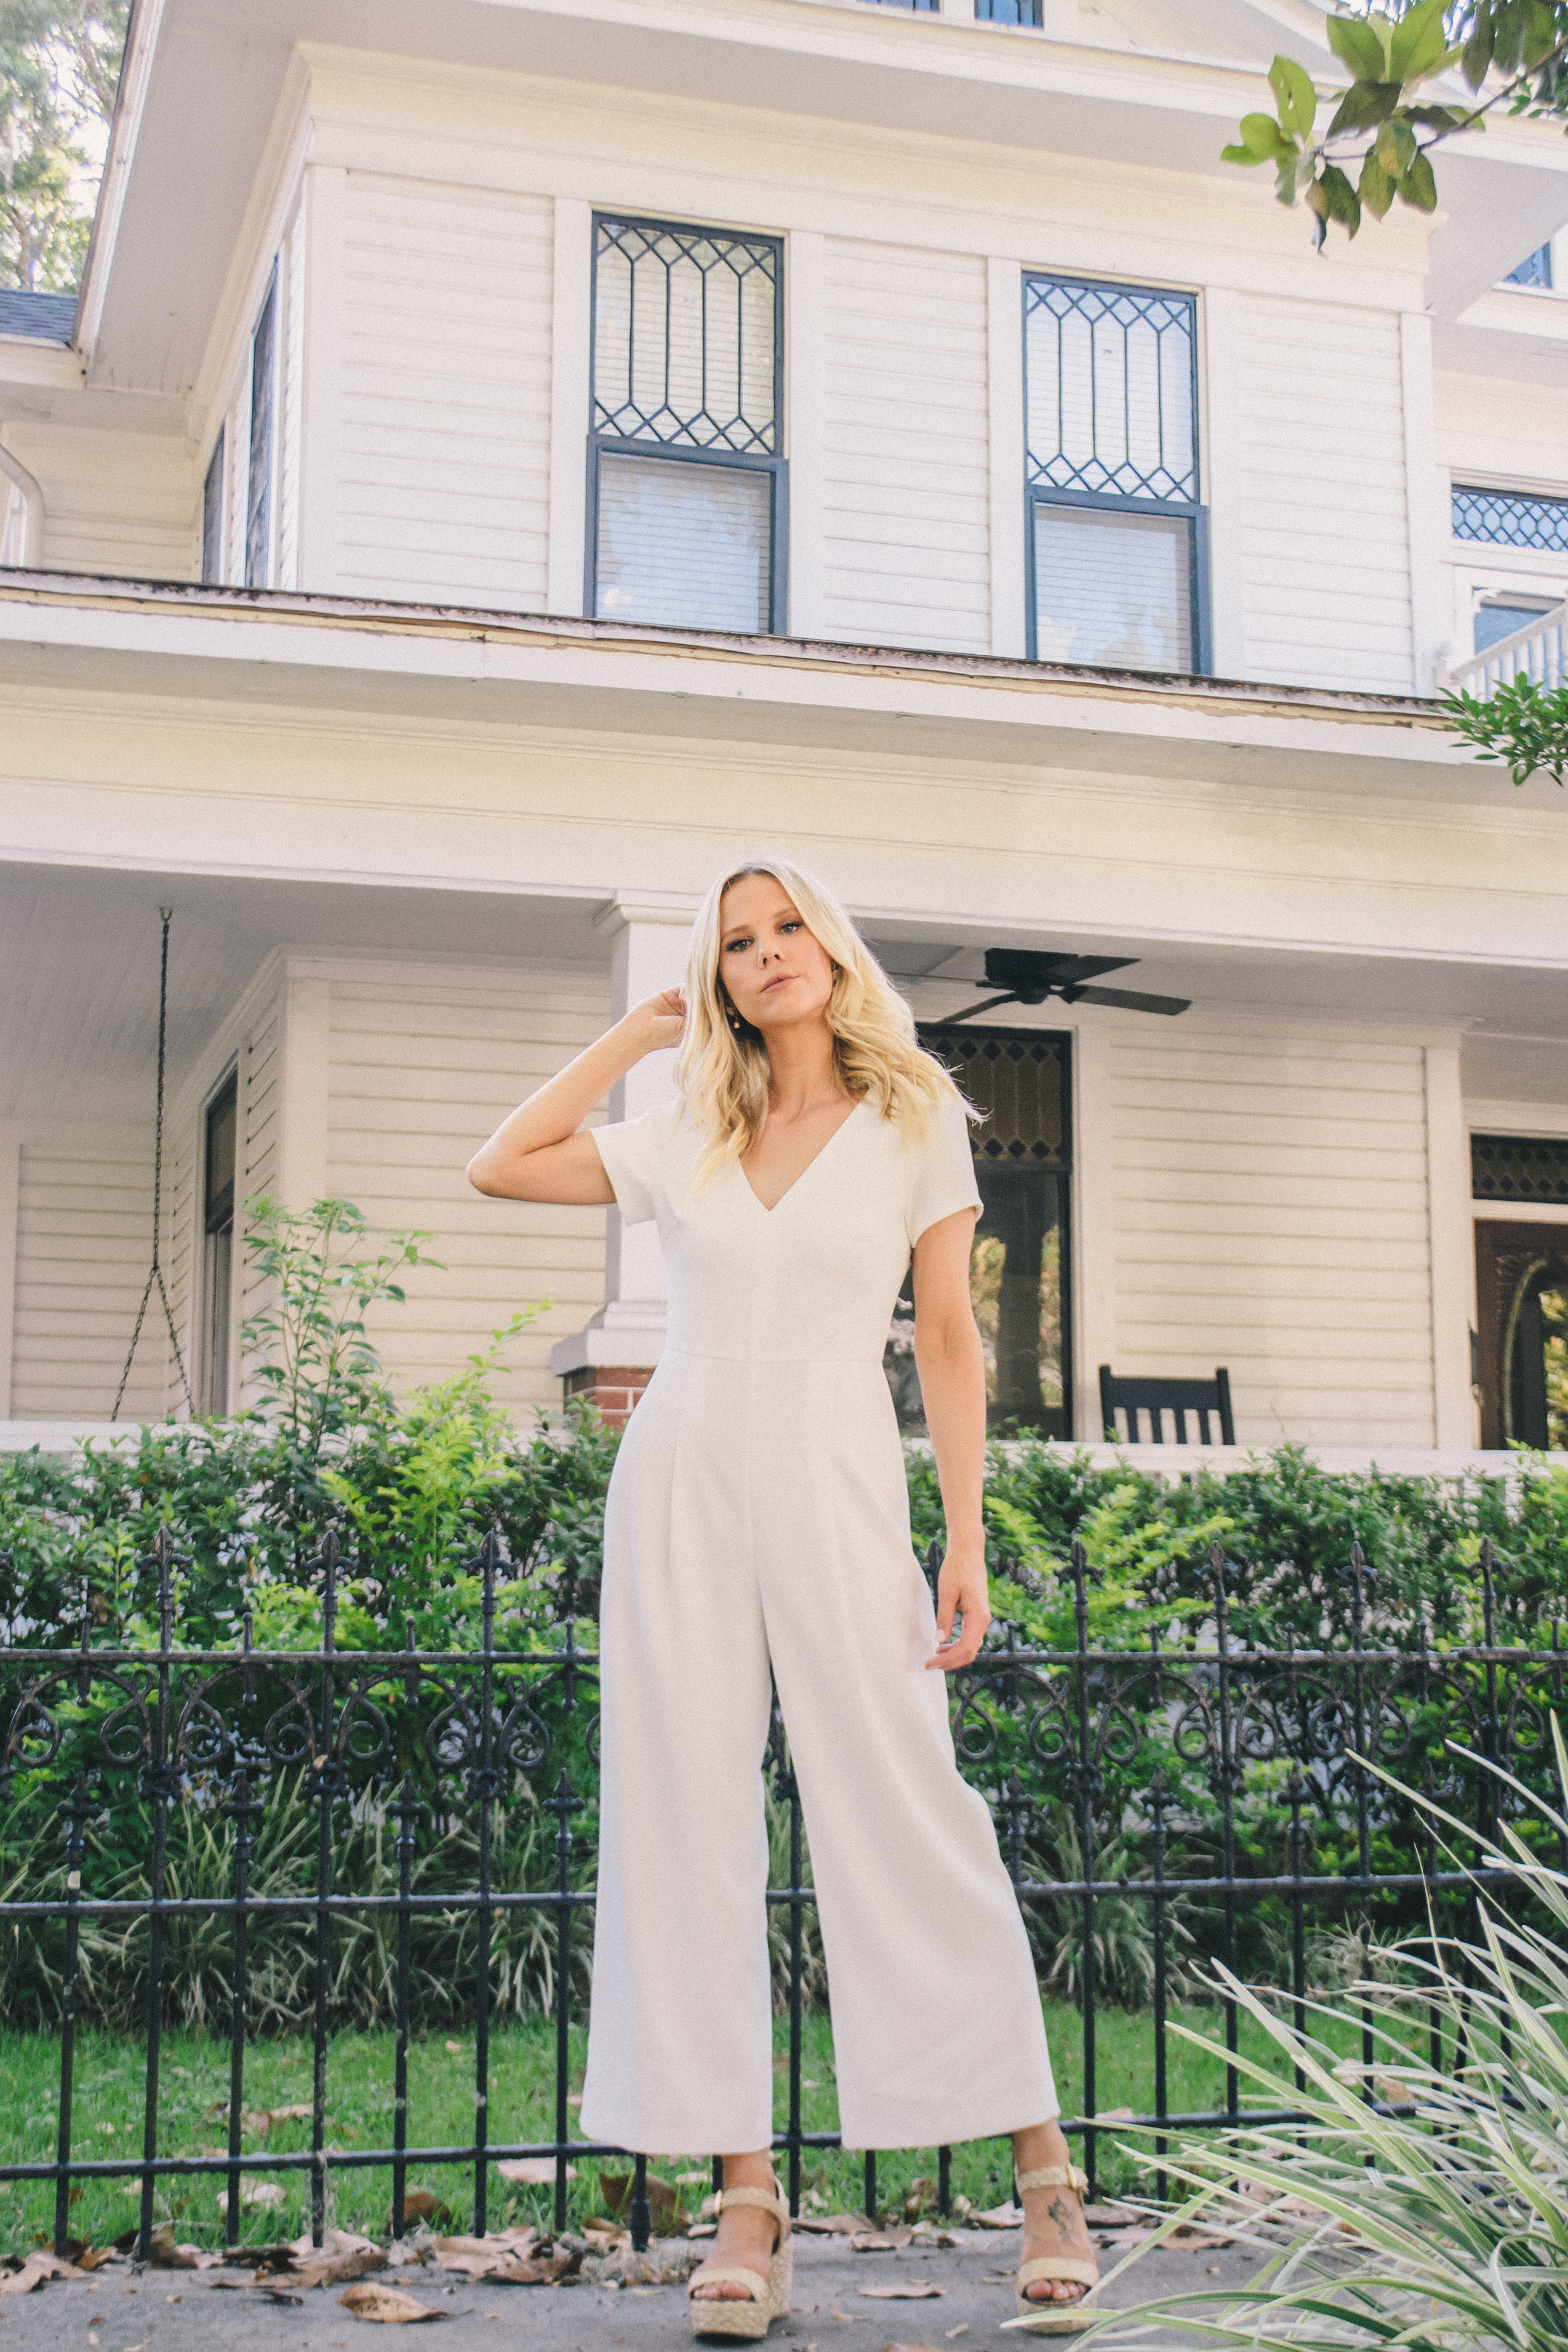 white jumpsuits for a bride, bride to be outfits, bride to be jumpsuit, white jumpsuit #whitejumpsuit #bridetobe #jumpsuit